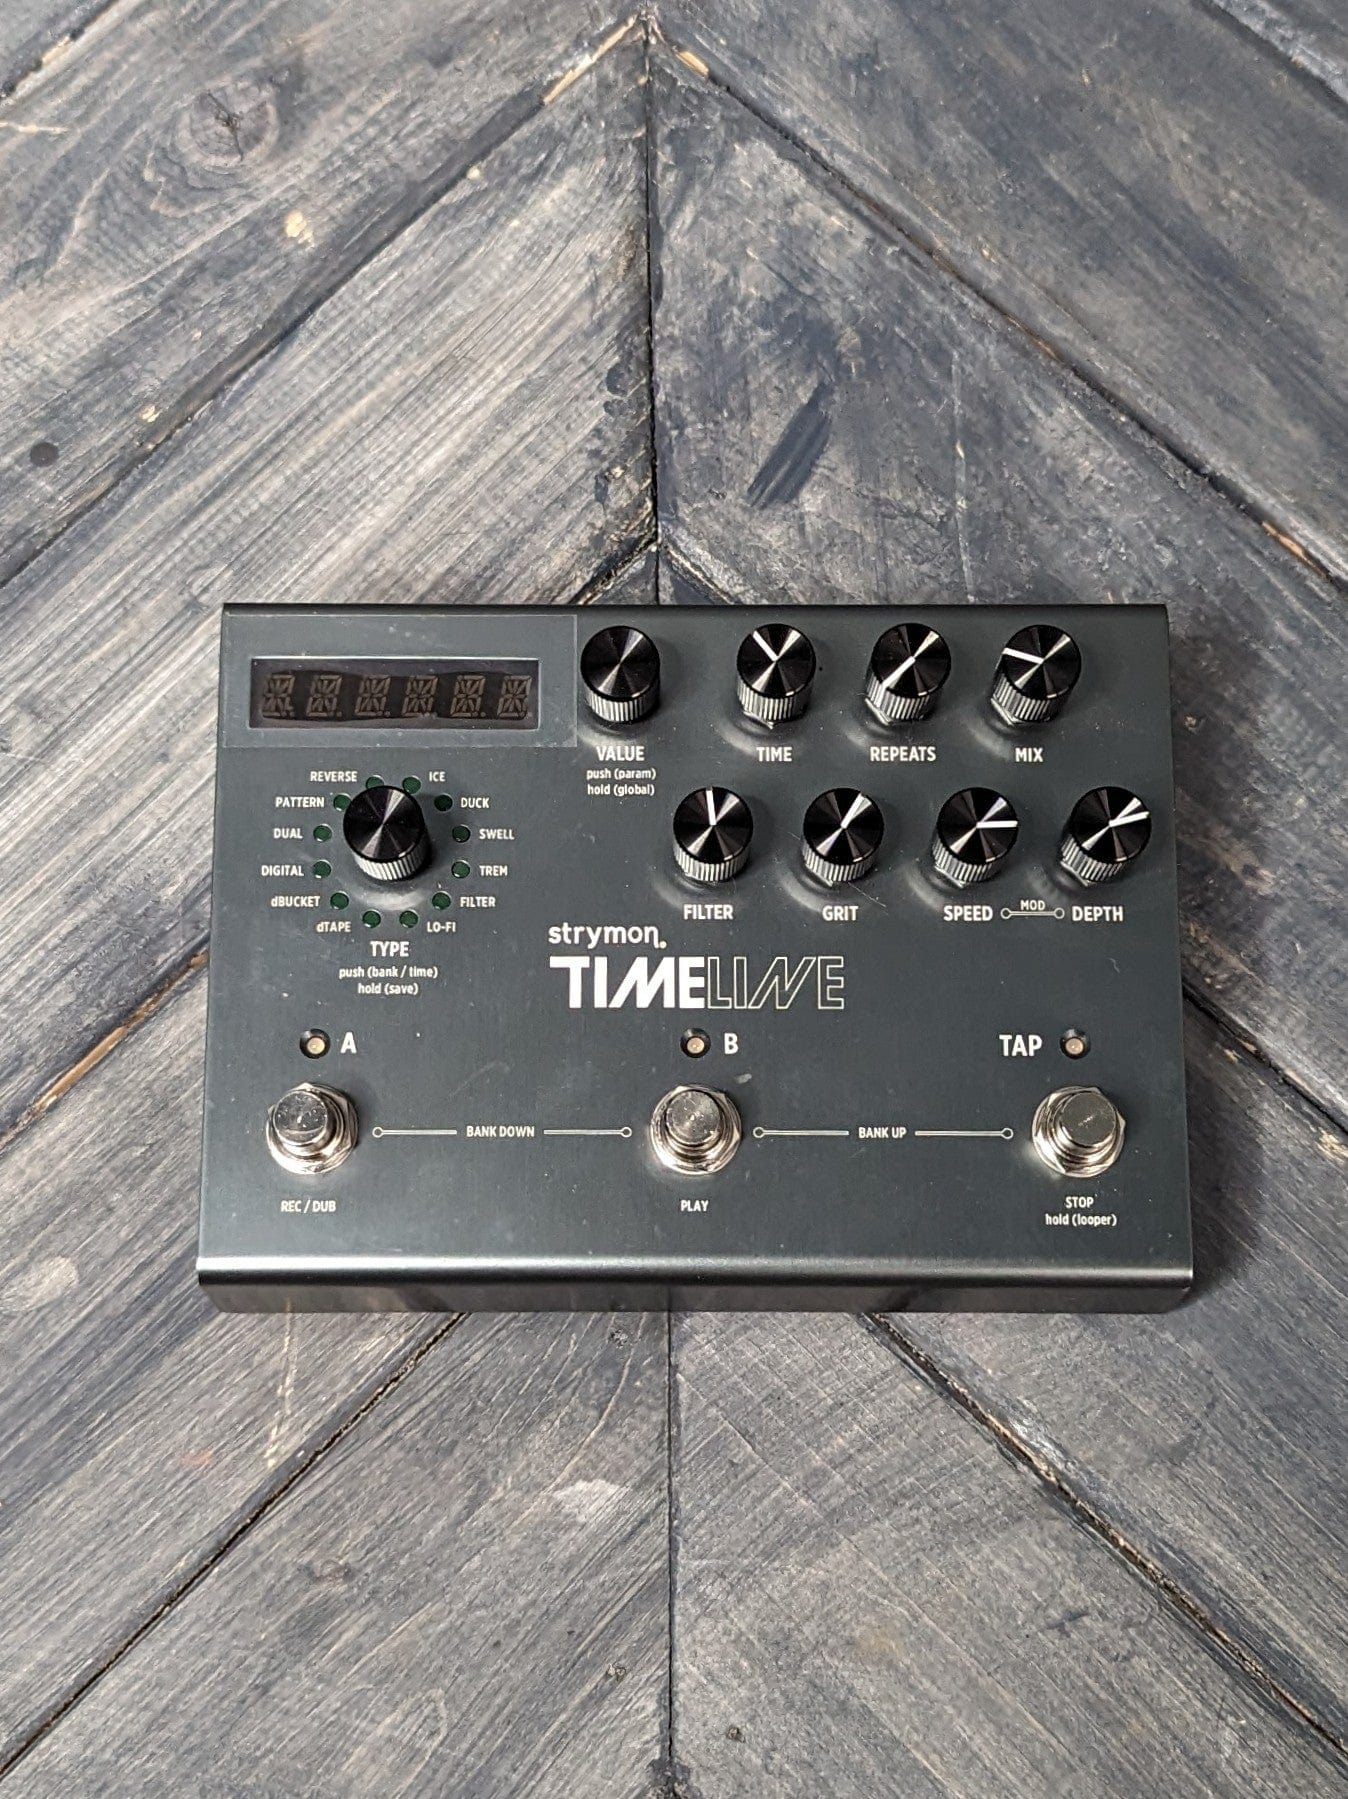 Used Strymon TimeLine top of pedal